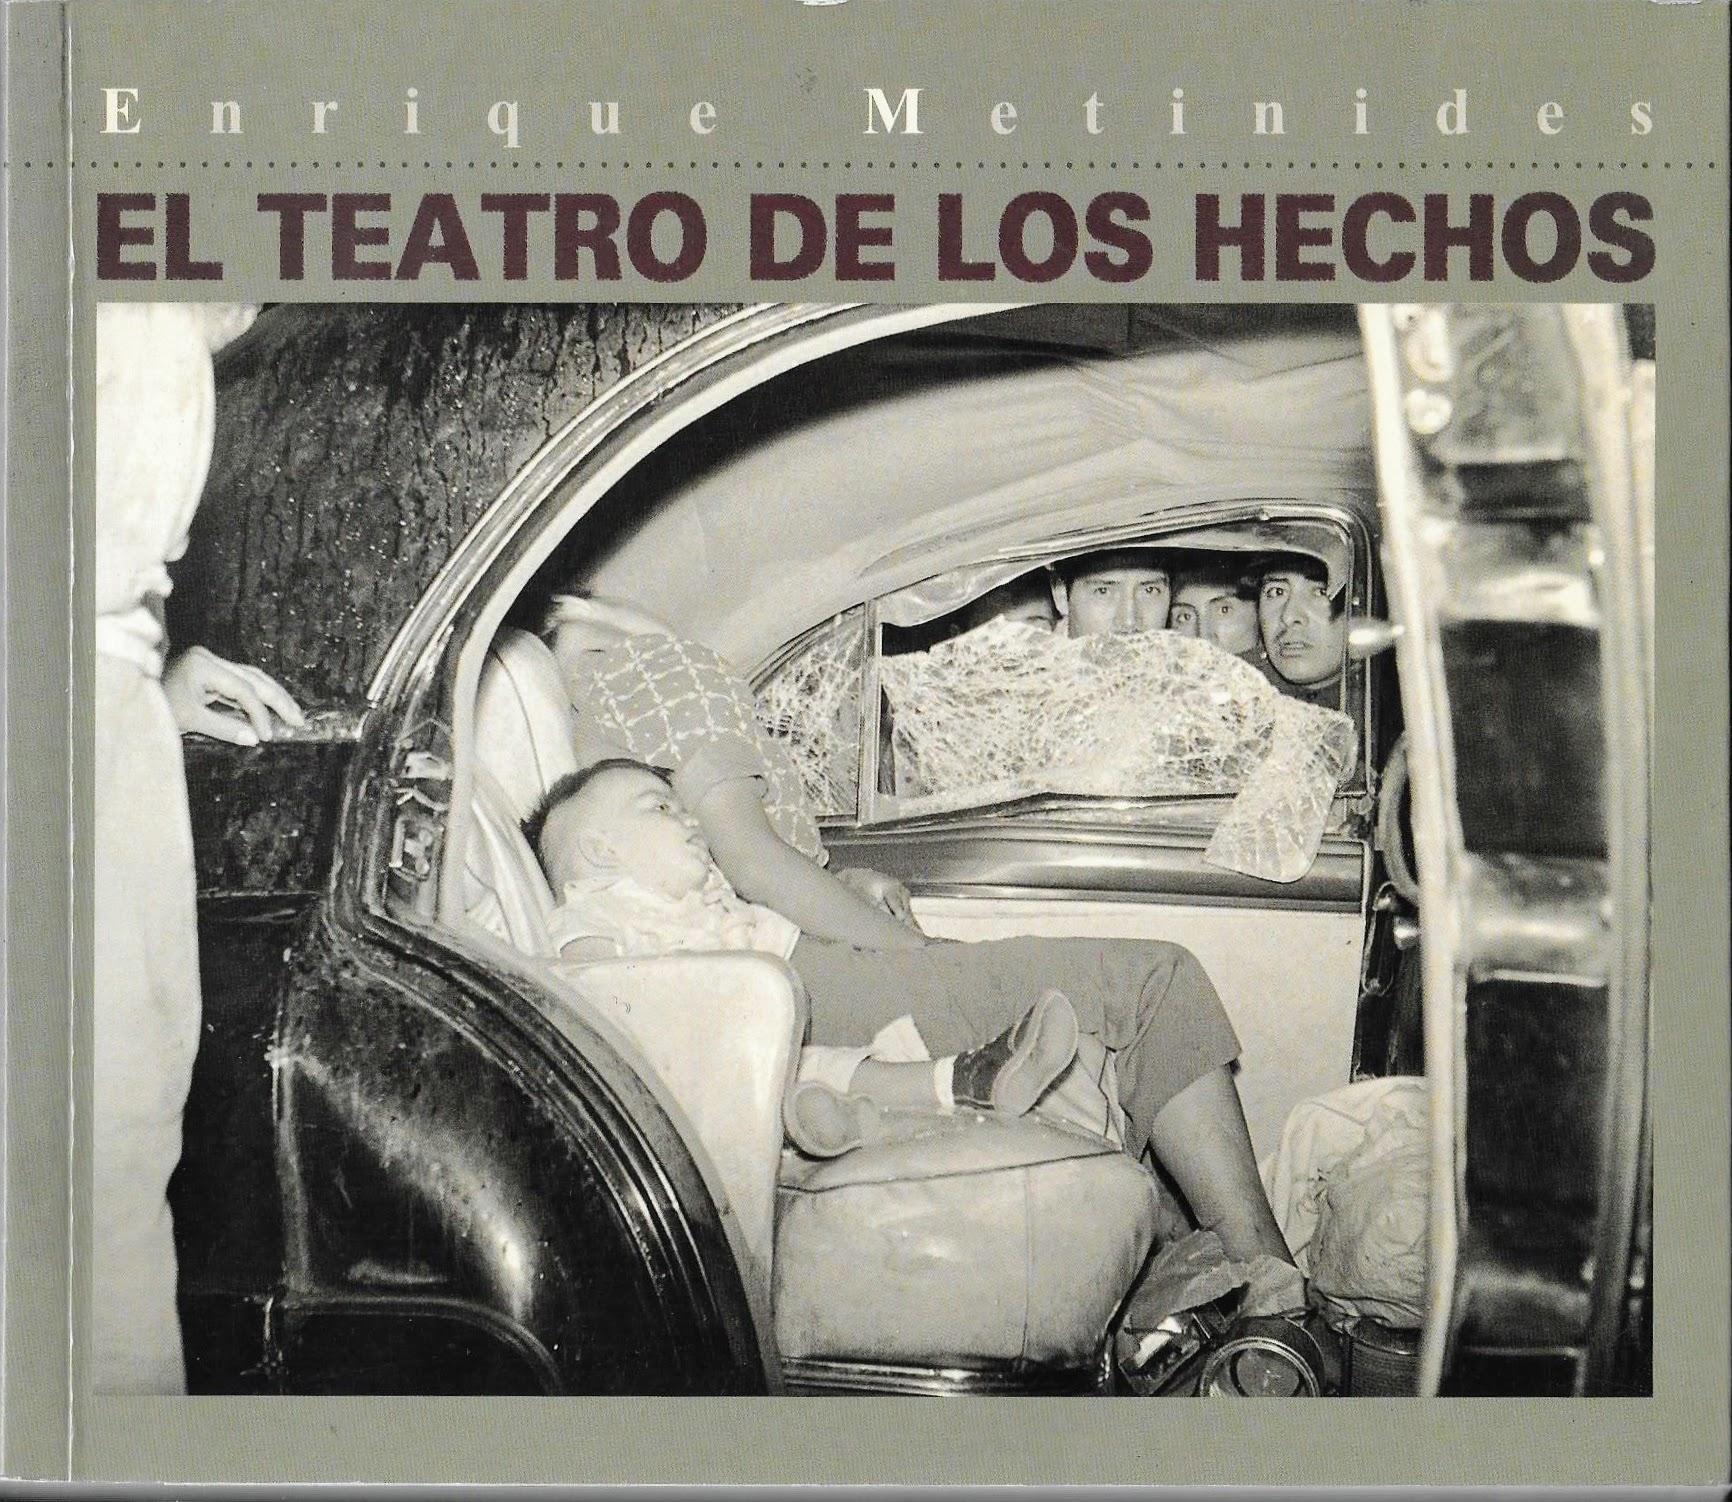 Hard to find book showcasing the work of Enrique Metinides (Feb. 1934- Jan. 2022) Mexican photojournalist known for his amazing and shocking photos of accidents, fires, and violent incidents in the streets of Mexico City. The book is First Edition,